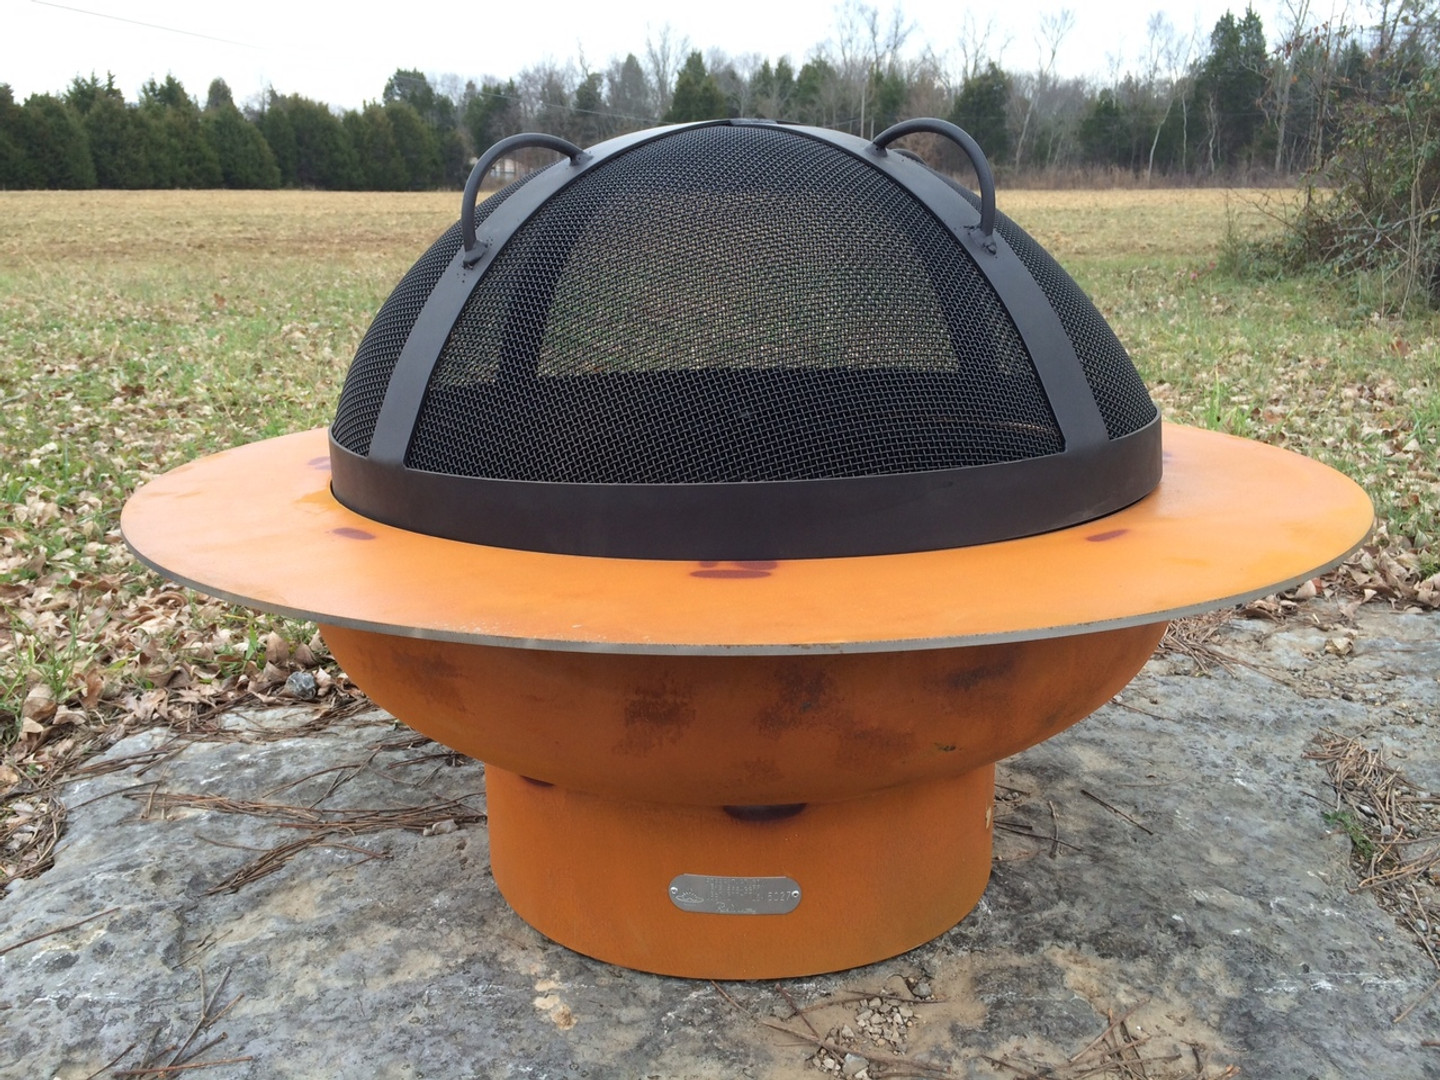 The SG-27.5" Artisan Spark Guard is handcrafted to rest on the tabs welded on the ID (inner diameter) of the Saturn bowl.  The SG-27.5 is designed to specifically fit Saturn and no other Fire Pit Art offering.